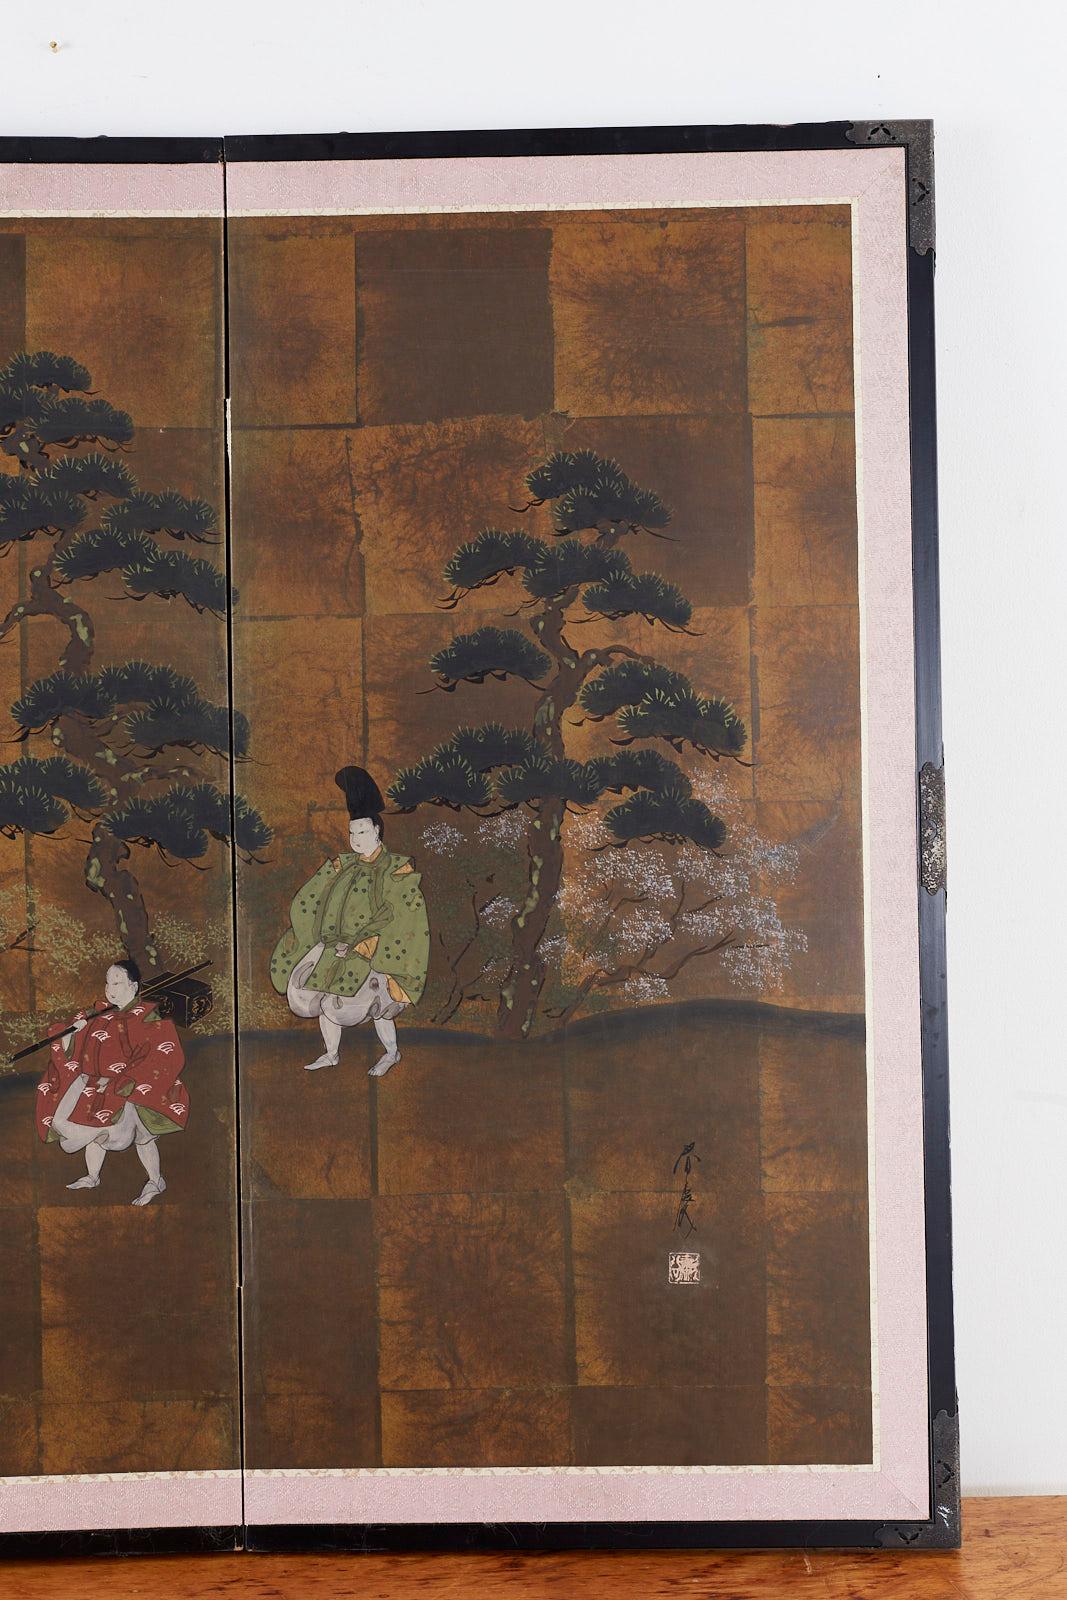 20th Century Japanese Four Panel Showa Period Narrative Tale Screen